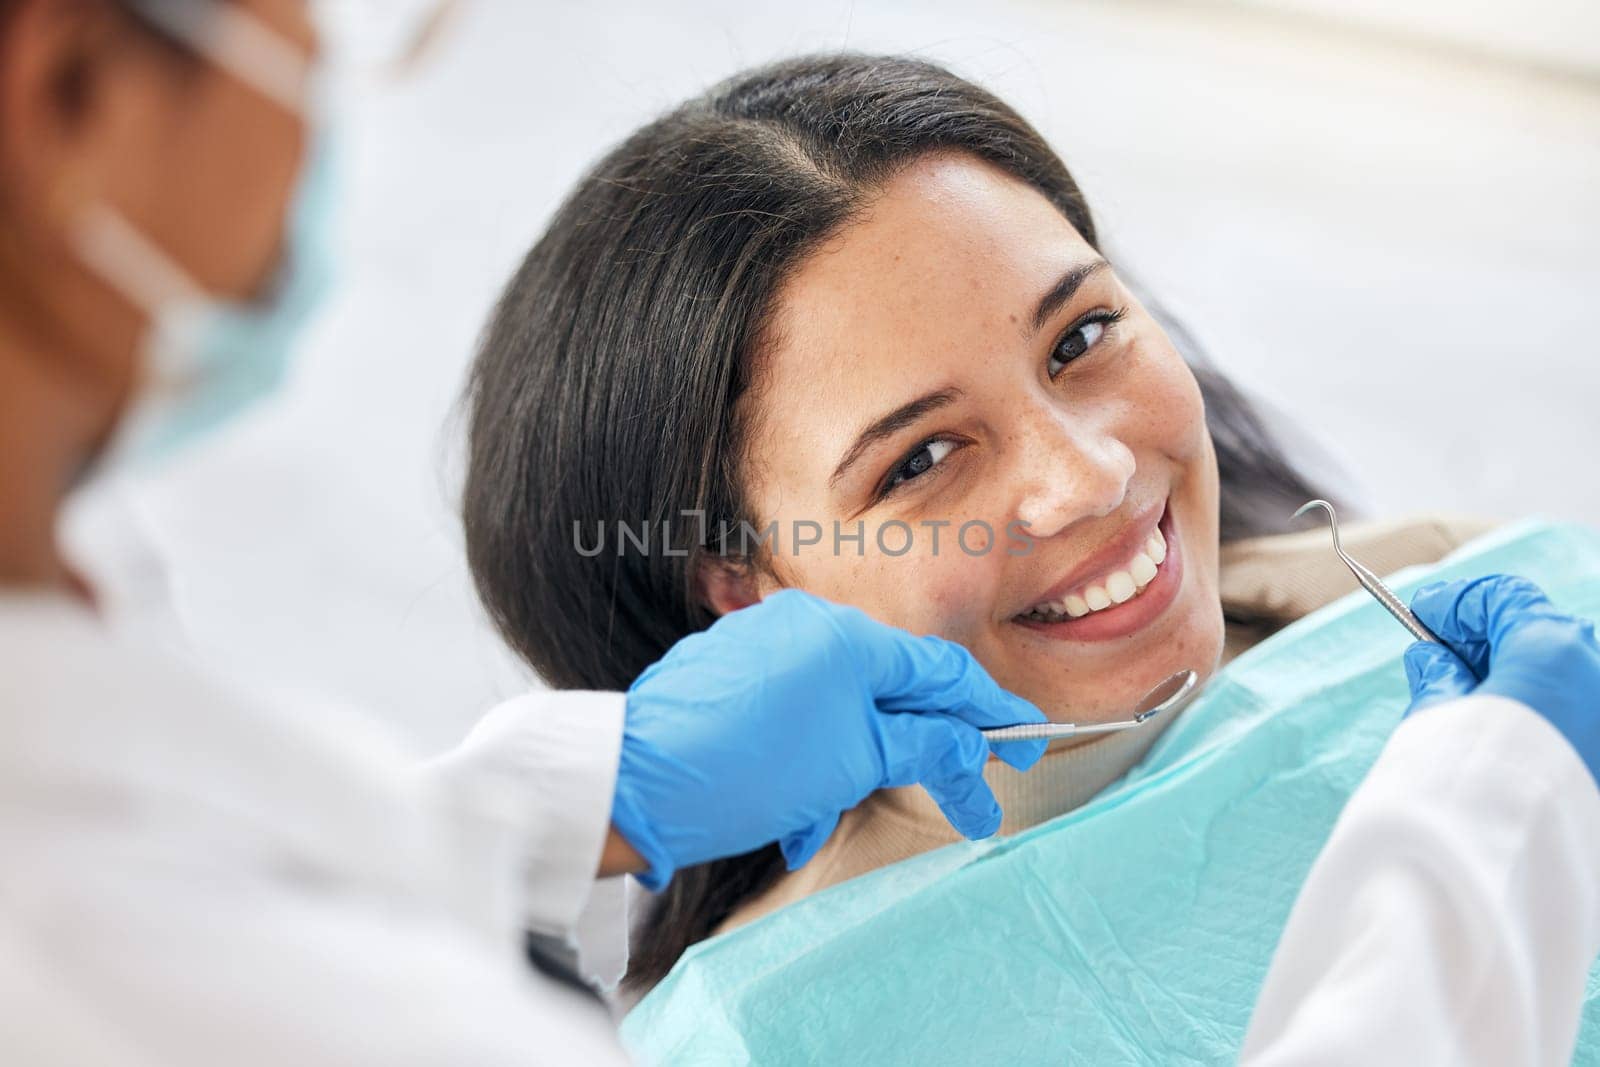 Dentist, dental care and teeth smile of a woman with tools and hands of a professional by mouth. Portrait of a female patient for orthodontics, healthcare and cleaning or inspection for oral health by YuriArcurs